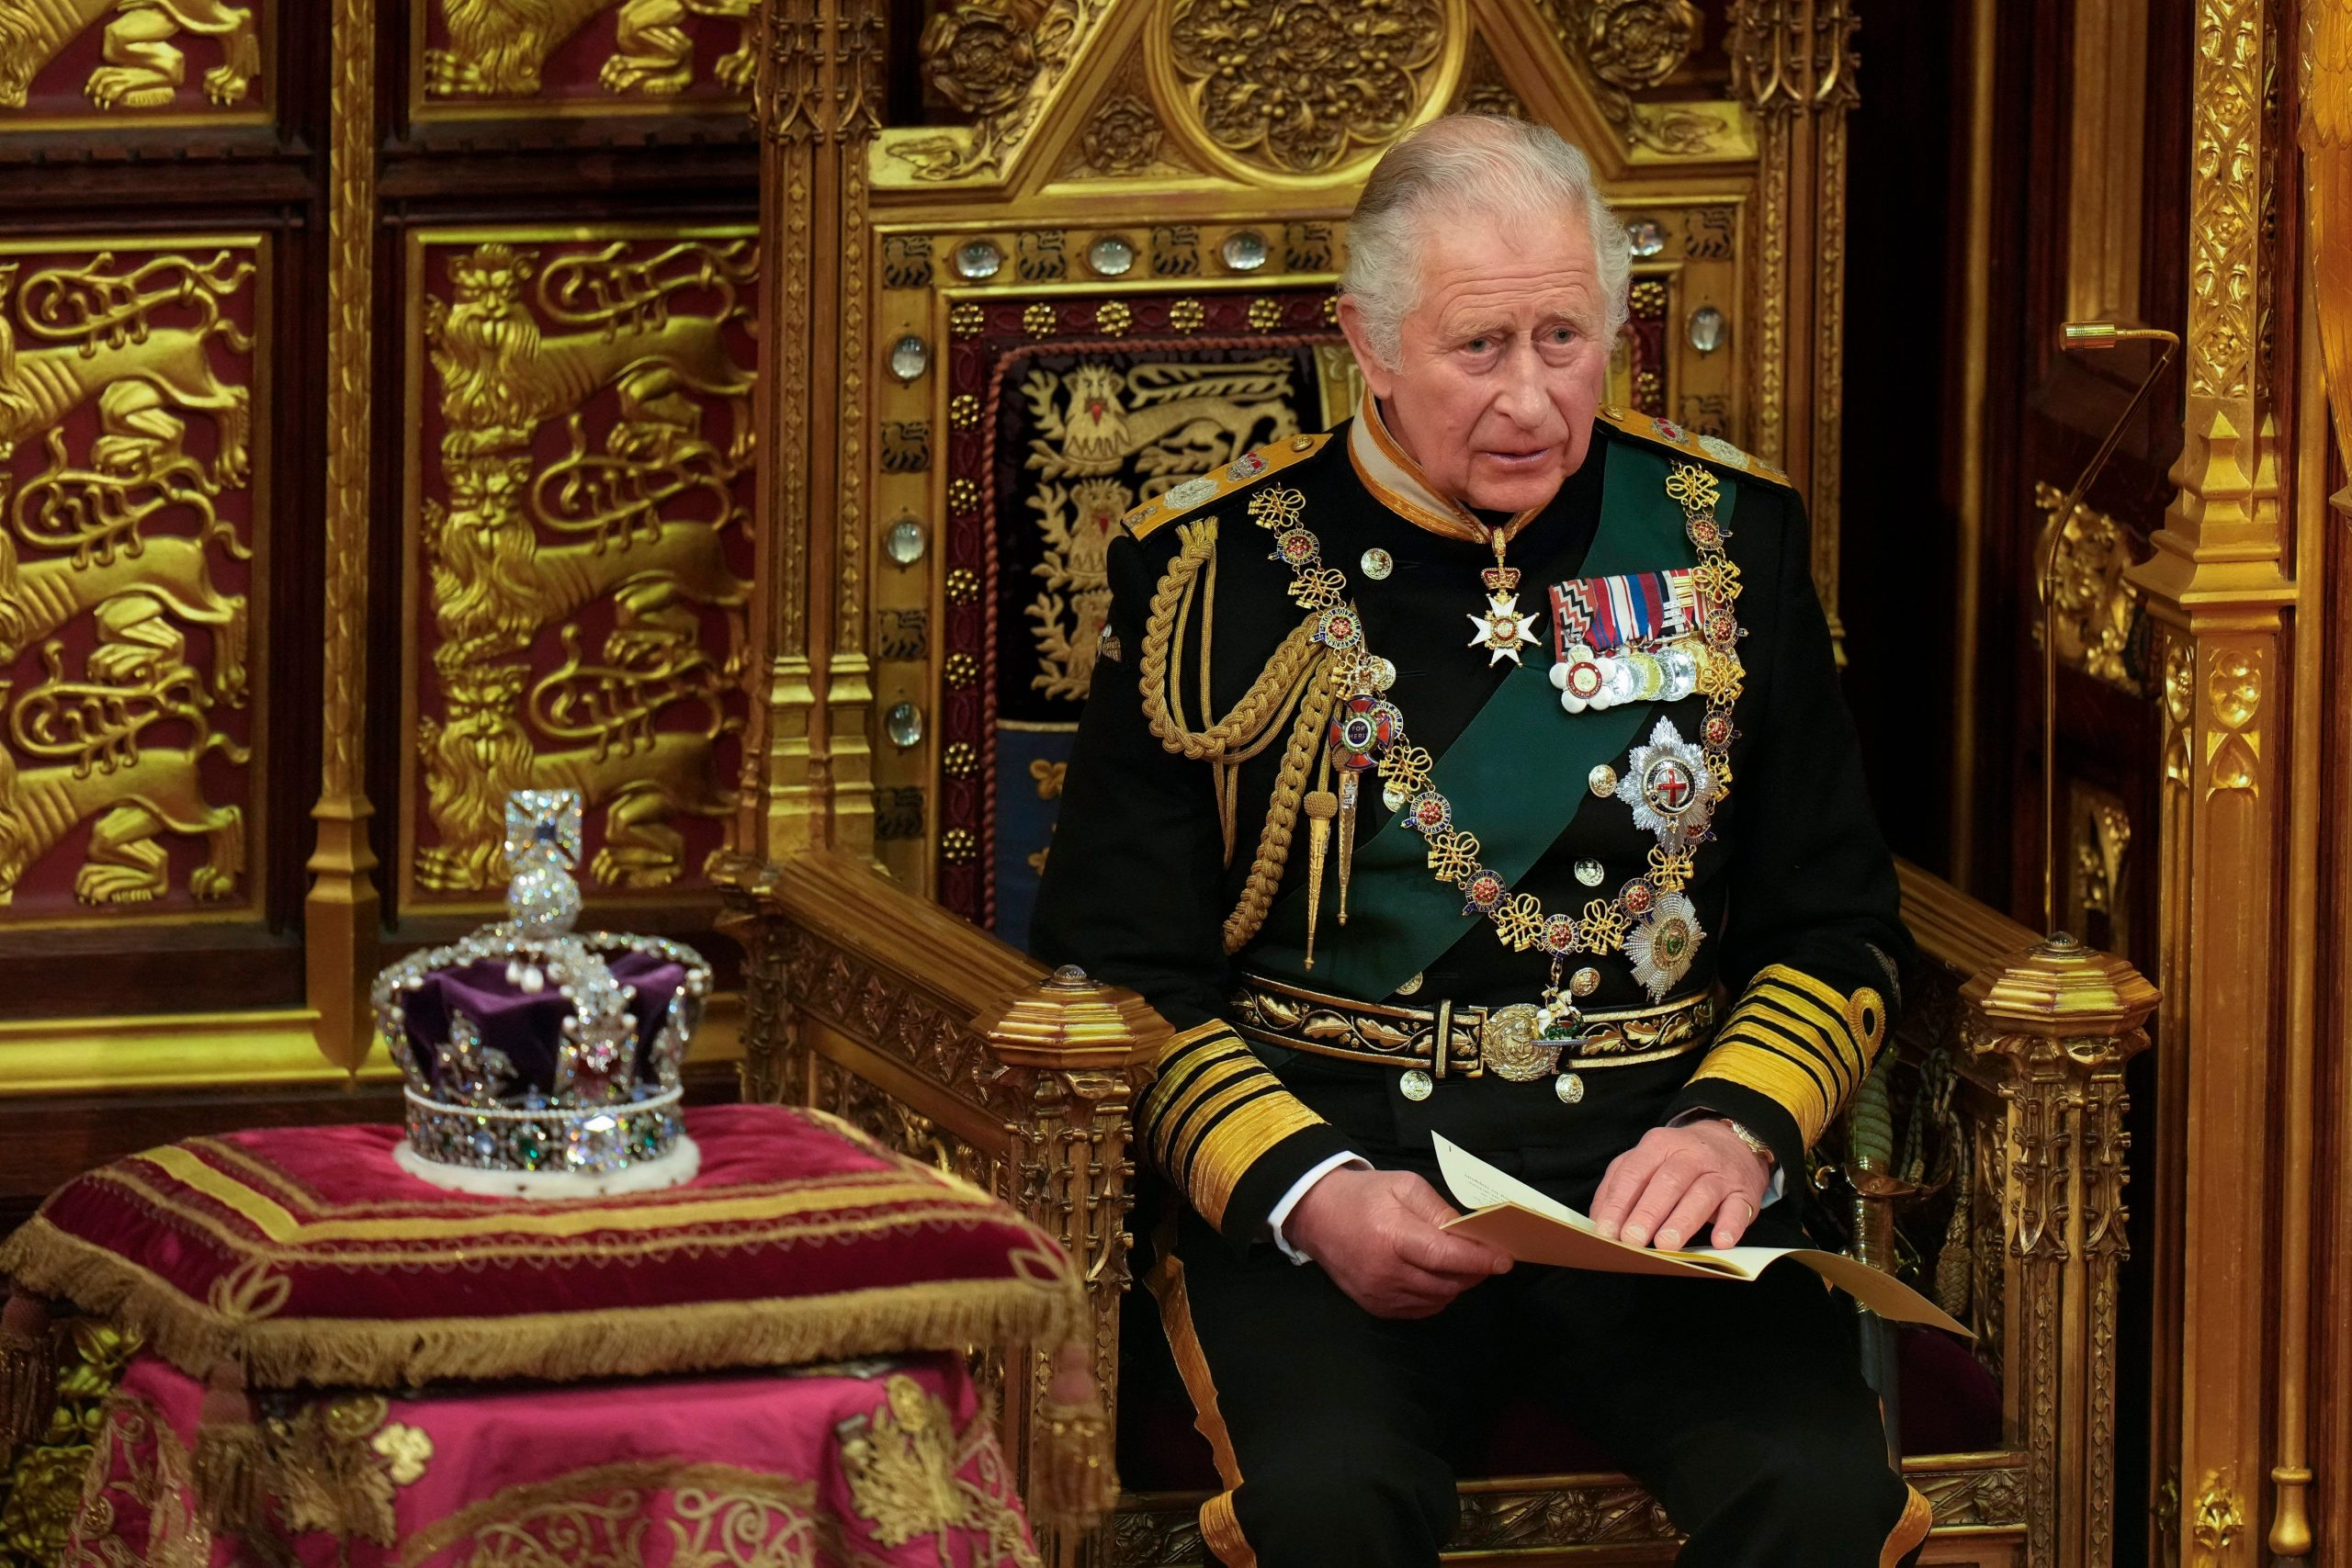 Queen Elizabeth II death: How Prince Charles accession to king works